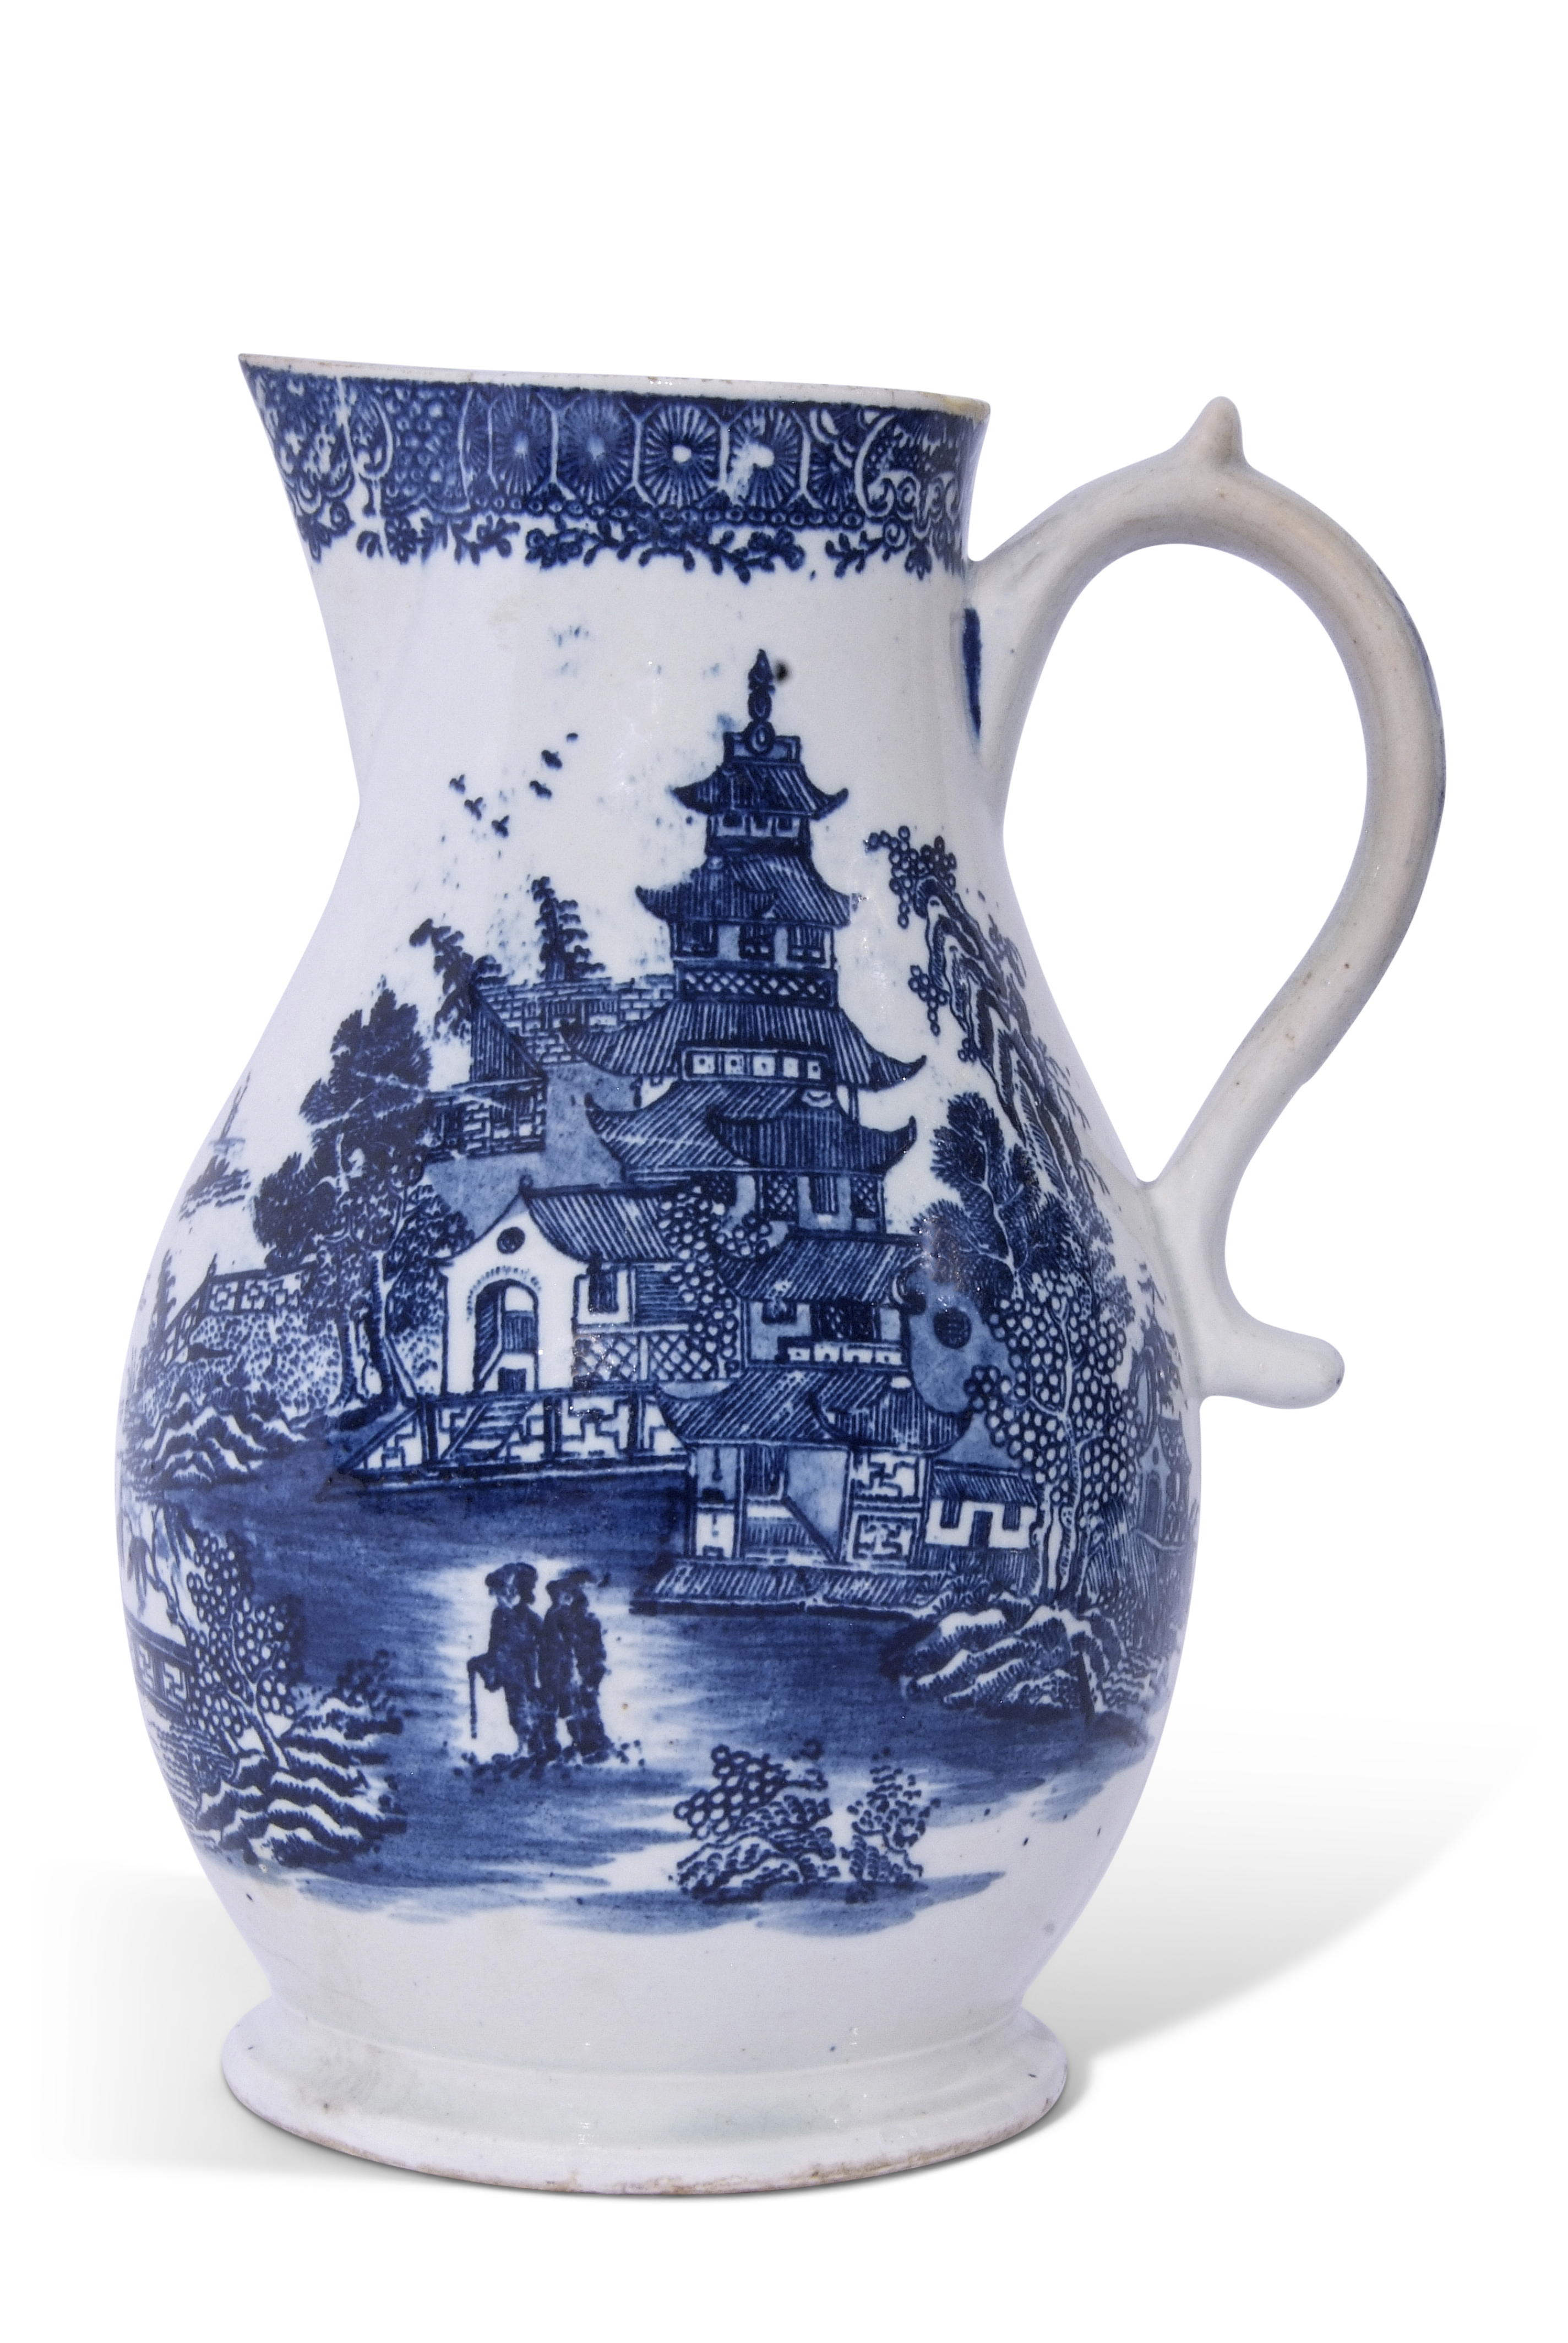 Large Lowestoft jug with a printed design of the temple pattern, 19cm high